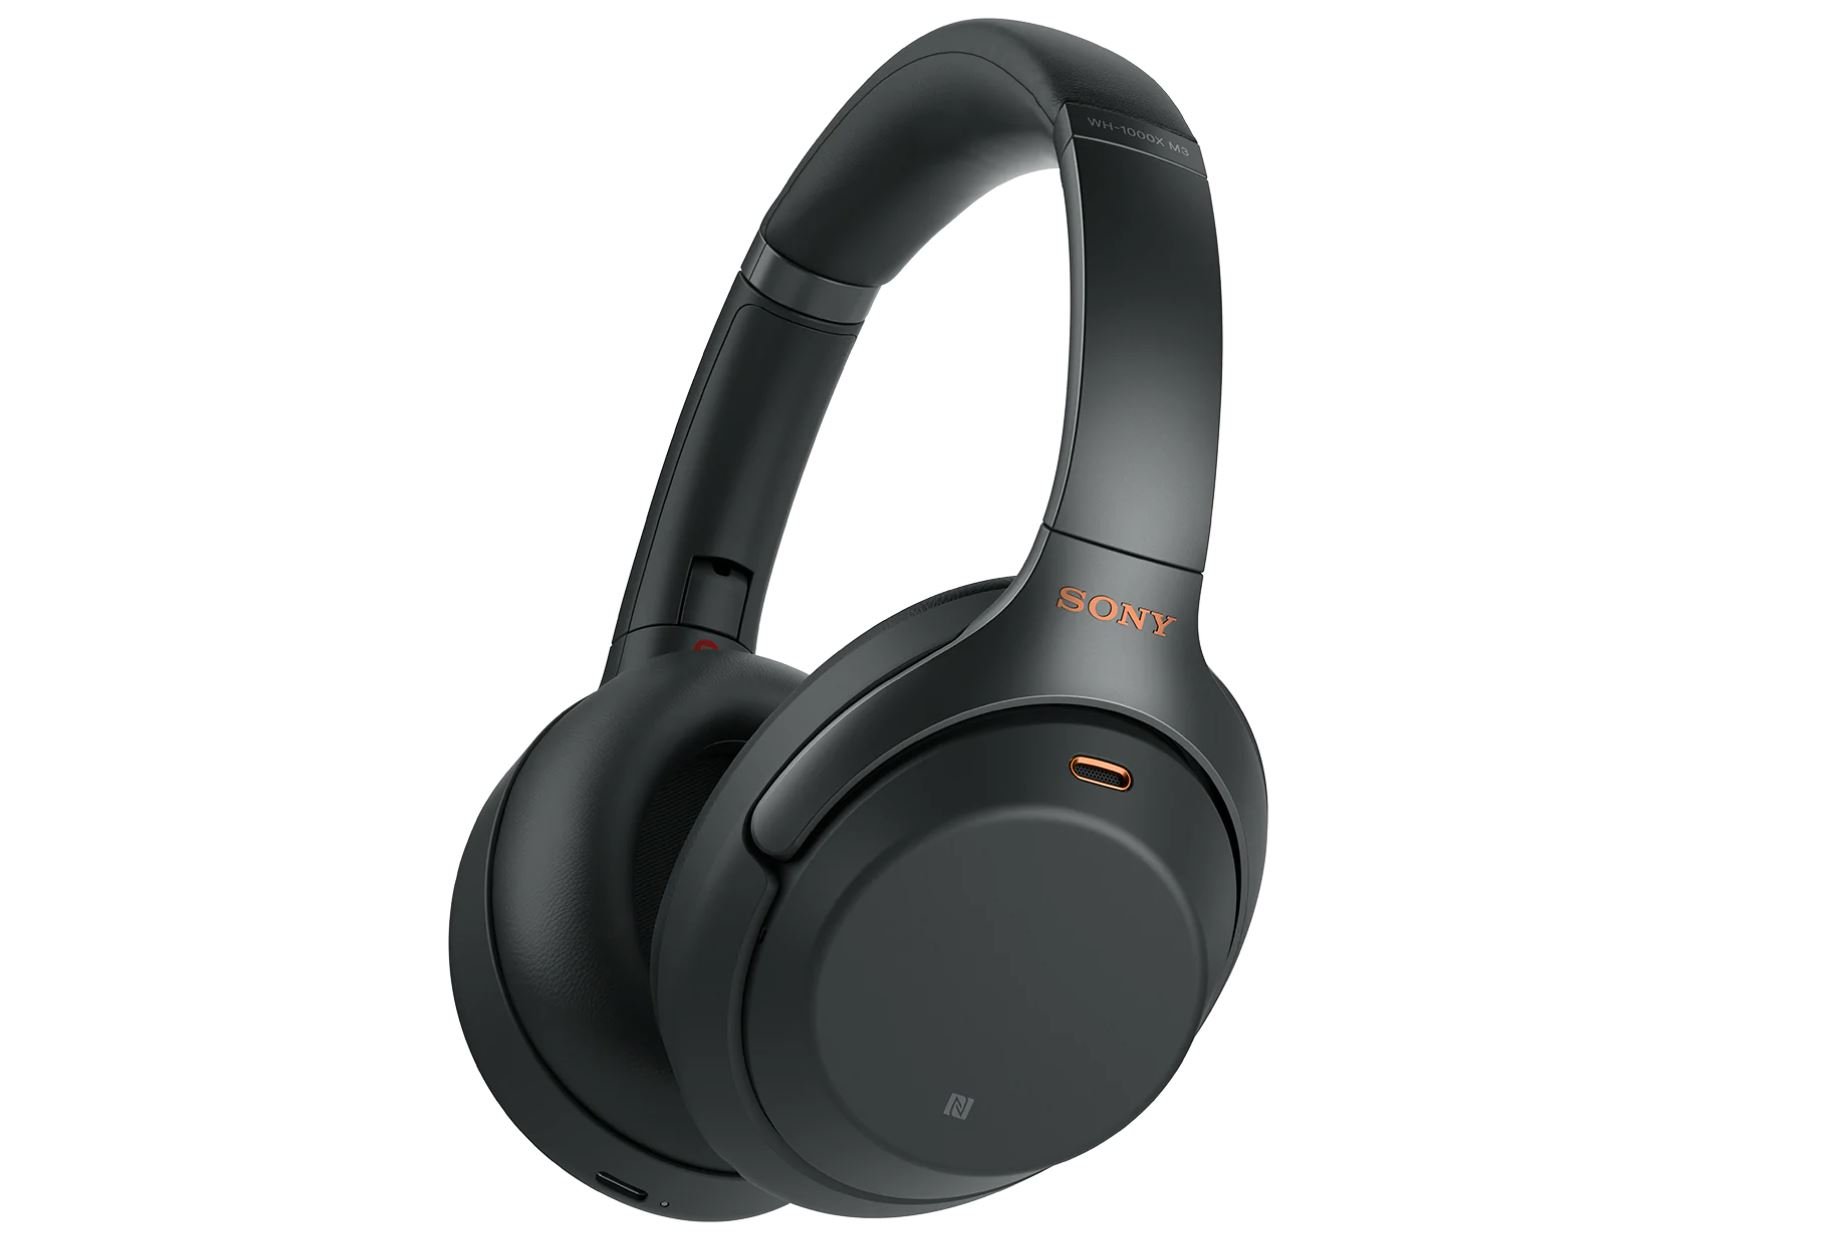 Deal Alert: Save $102 on the Sony WH-1000XM4 Wireless Noise-Cancelling headphones